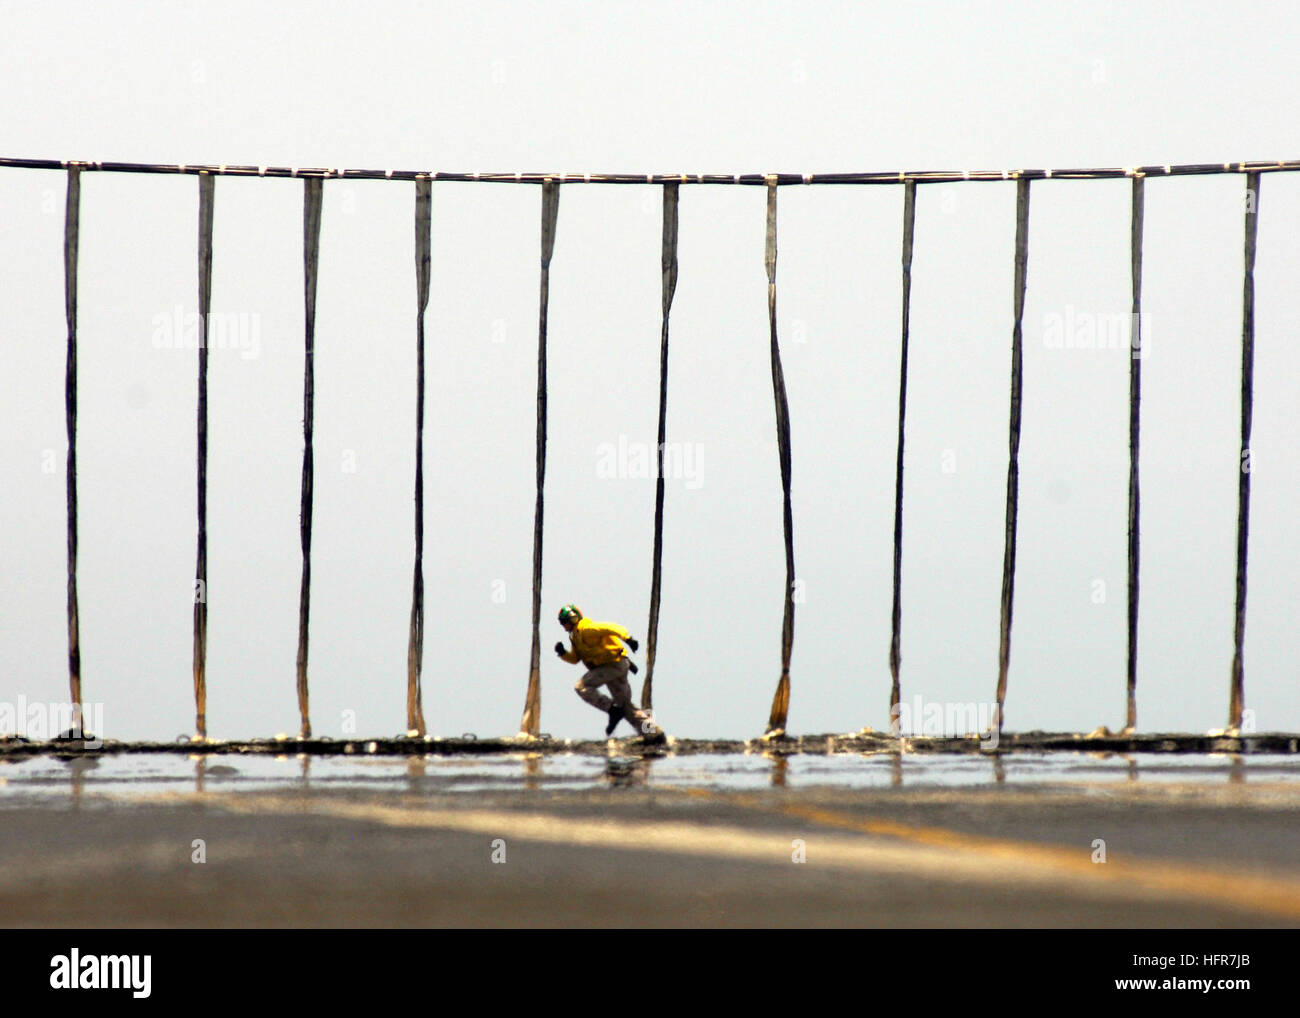 060611-N-9742R-075  Persian Gulf (June 11, 2006) - A flight deck officer runs along the length of an erected aircraft barricade checking its integrity during a barricade drill on the flight deck of the nuclear-powered aircraft carrier USS Enterprise (CVN 65). The Enterprise Carrier Strike group is currently deployed as part of a routine rotation of U.S. maritime forces in support of the global war on terrorism, as well as conducting Maritime Security Operations (MSO) in the region. U.S. Navy photo by Photographer's Mate 2nd Class Milosz Reterski (RELEASED) US Navy 060611-N-9742R-075 A flight d Stock Photo